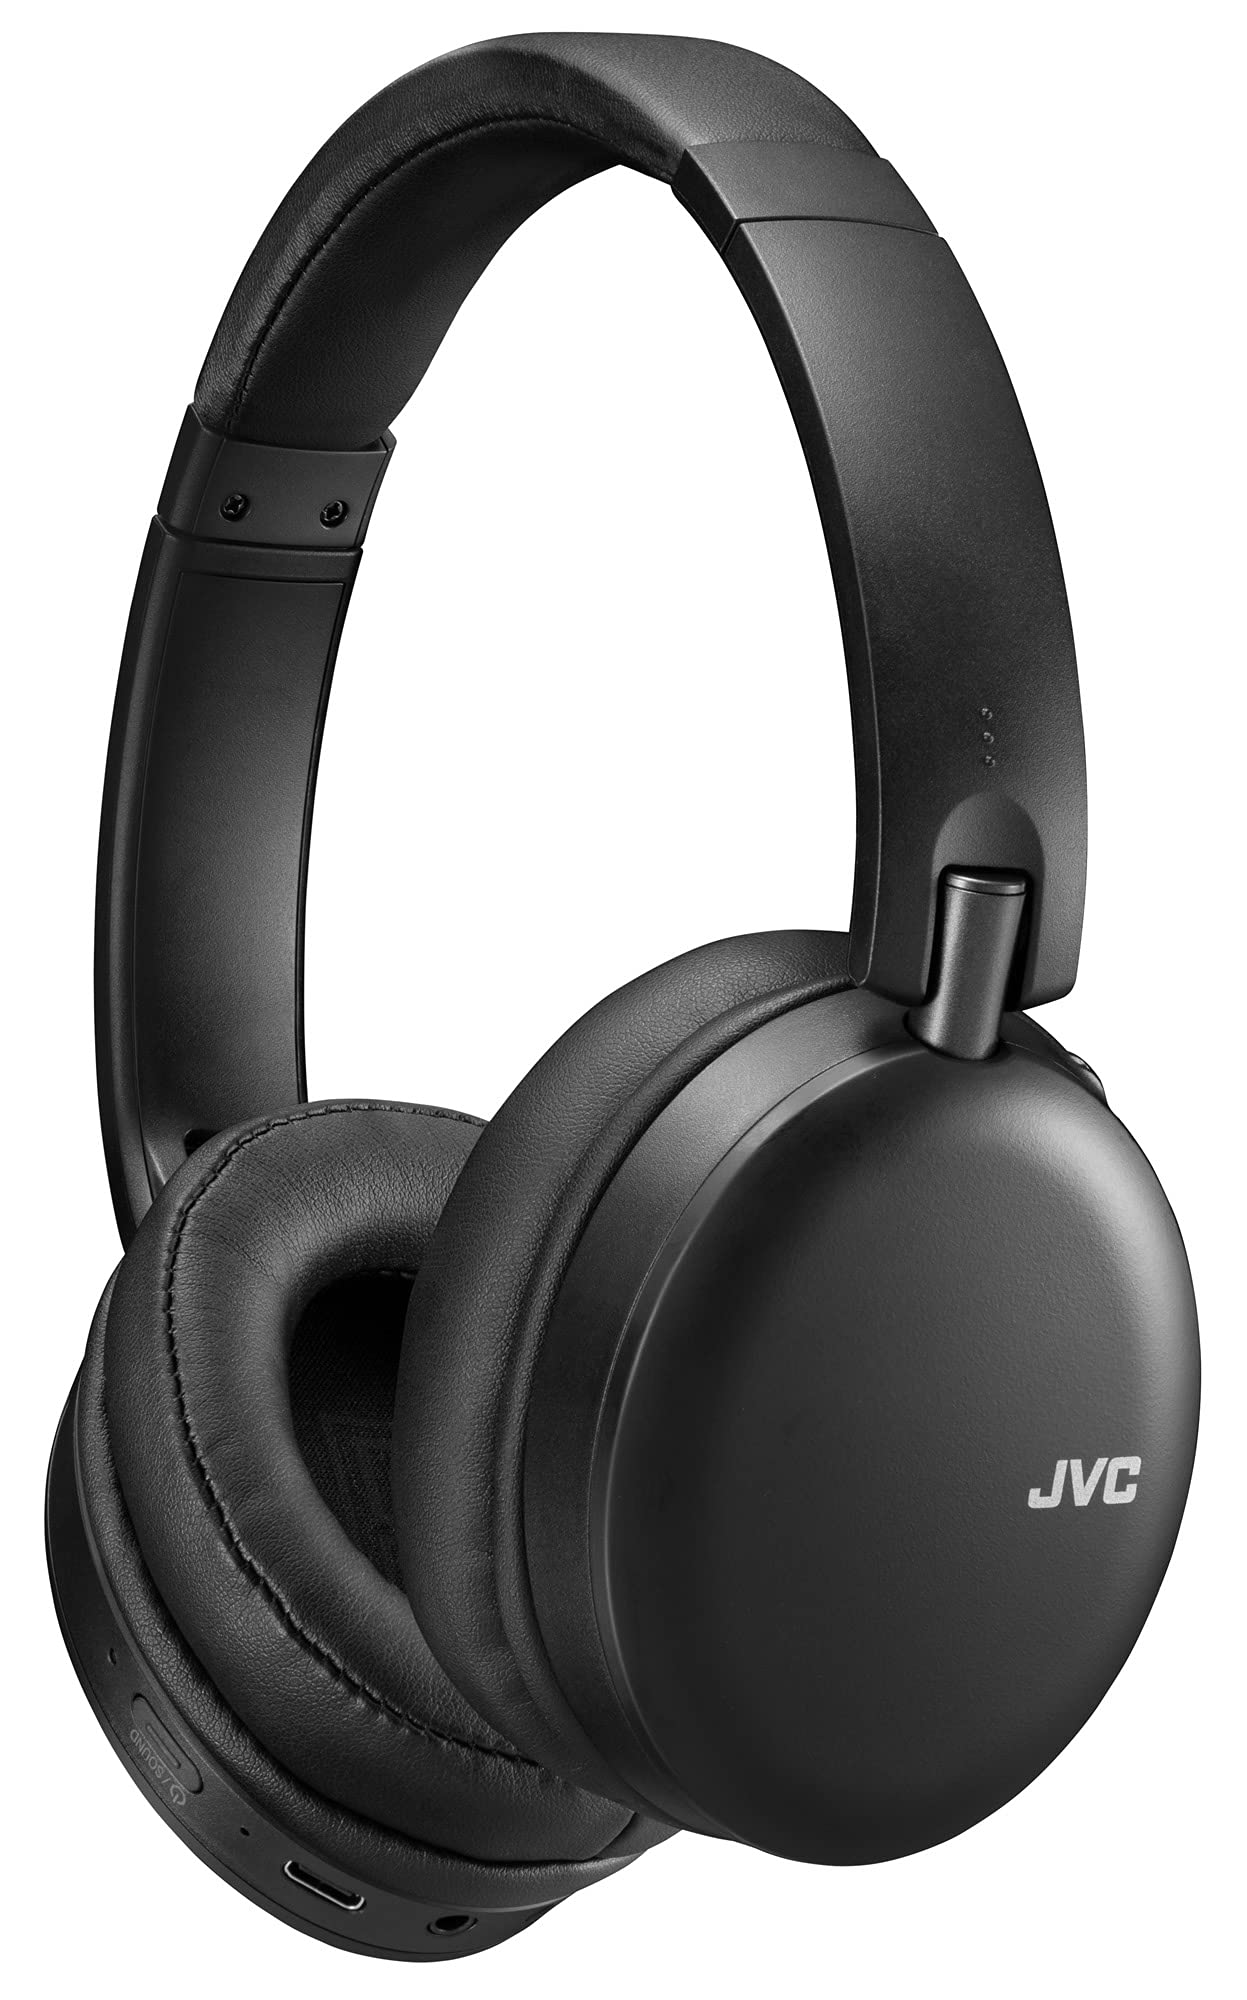 How to Connect JVC Bluetooth Headphones